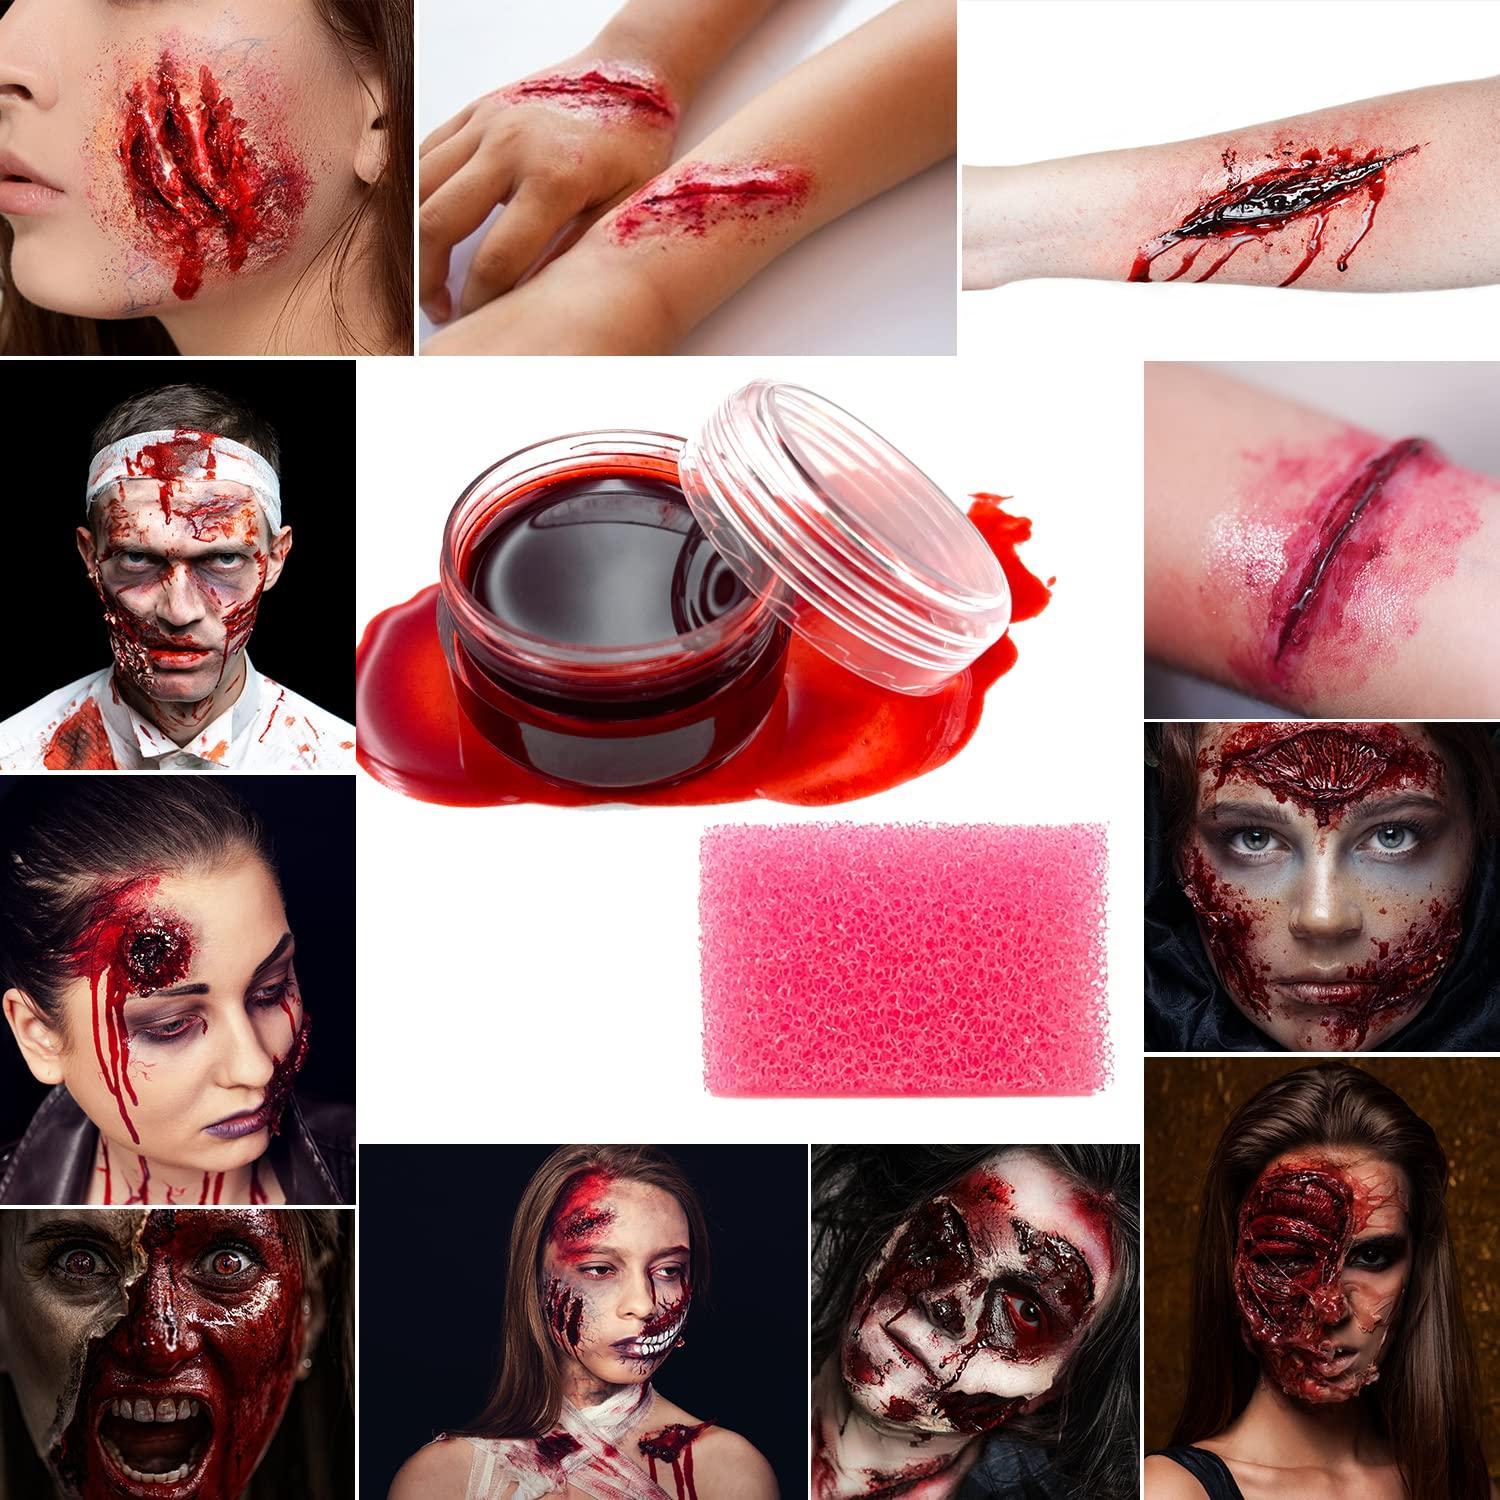 immetee Scar Wax SFX Makeup Kit, Face & Body Paint, Christmas Halloween  Makeup Kit, Fake Blood, Painting Brushes, Spatula, Stipple Sponge, Stage  Theatrical Party Cosplay, Carnival